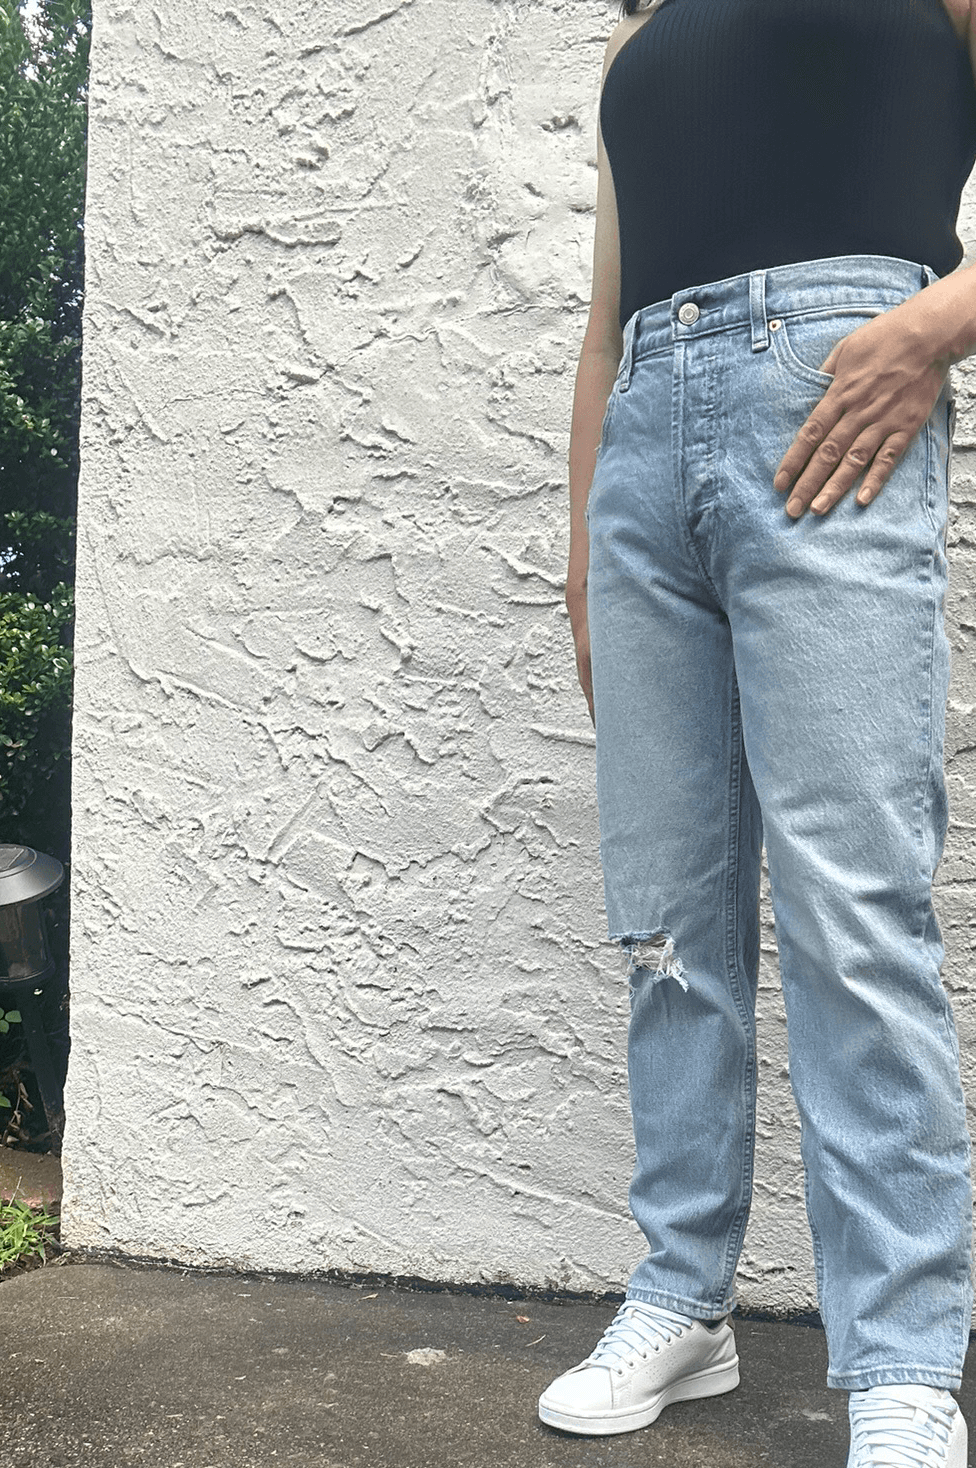 26 Cute Pants If You're Getting Tired Of Your Skinnies